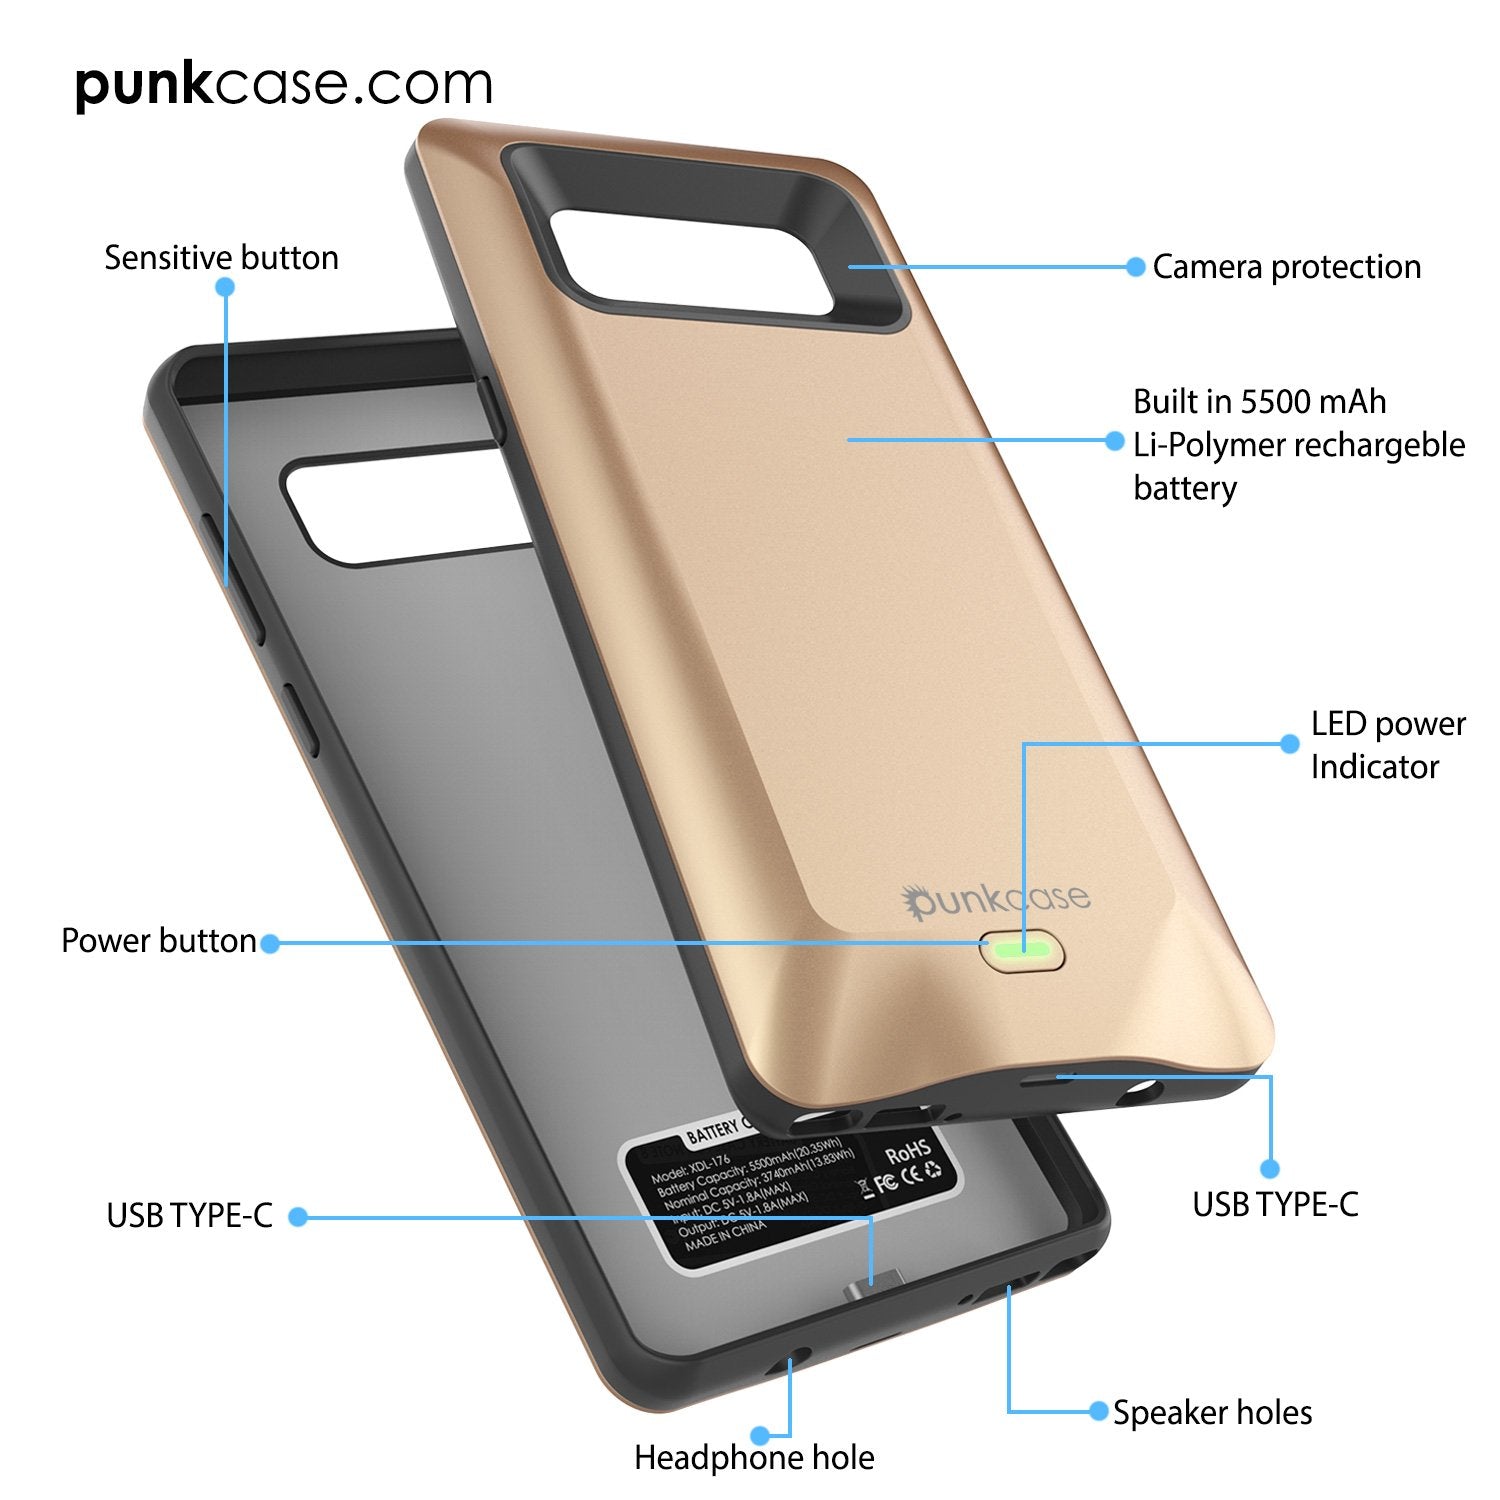 Galaxy Note 8 Battery Case, Punkcase 5000mAH Charger Case W/ Screen Protector | Integrated USB Port | IntelSwitch [Gold] - PunkCase NZ